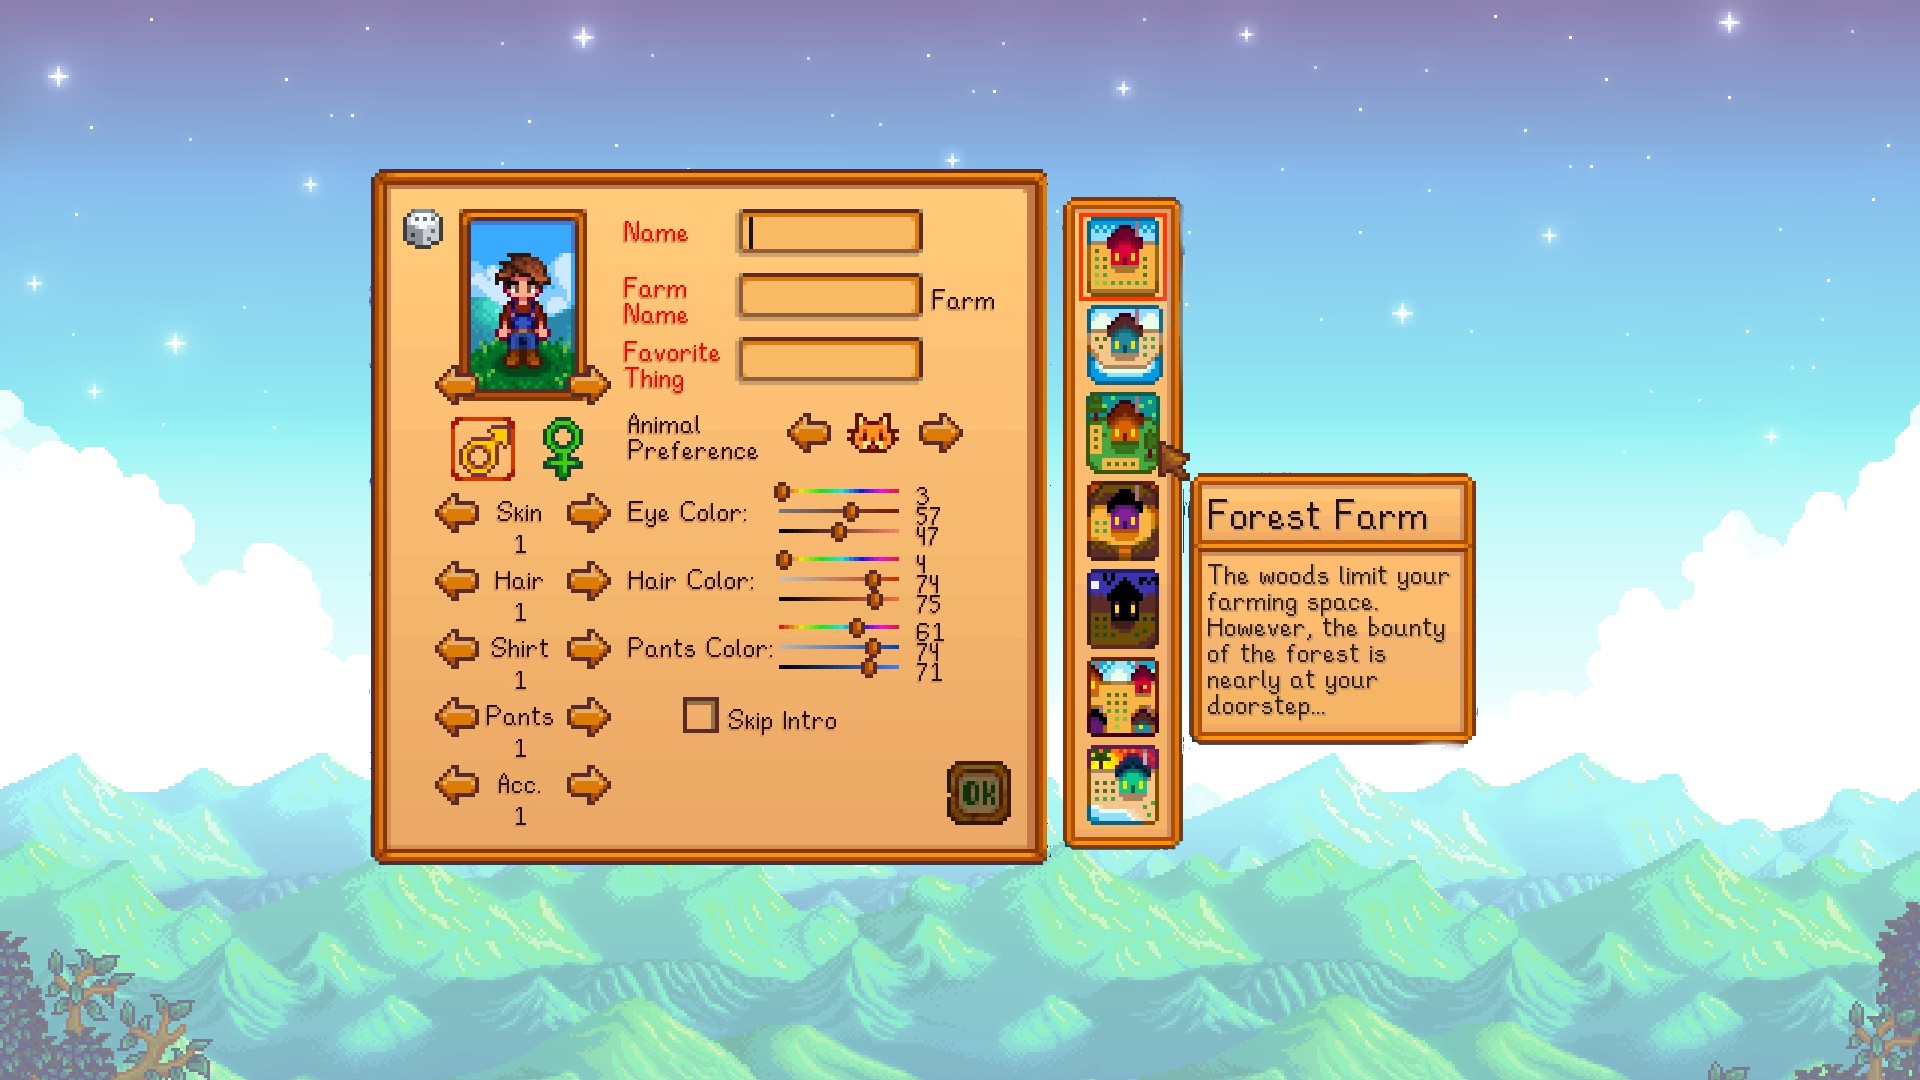 The Best Farm to Choose in Stardew Valley